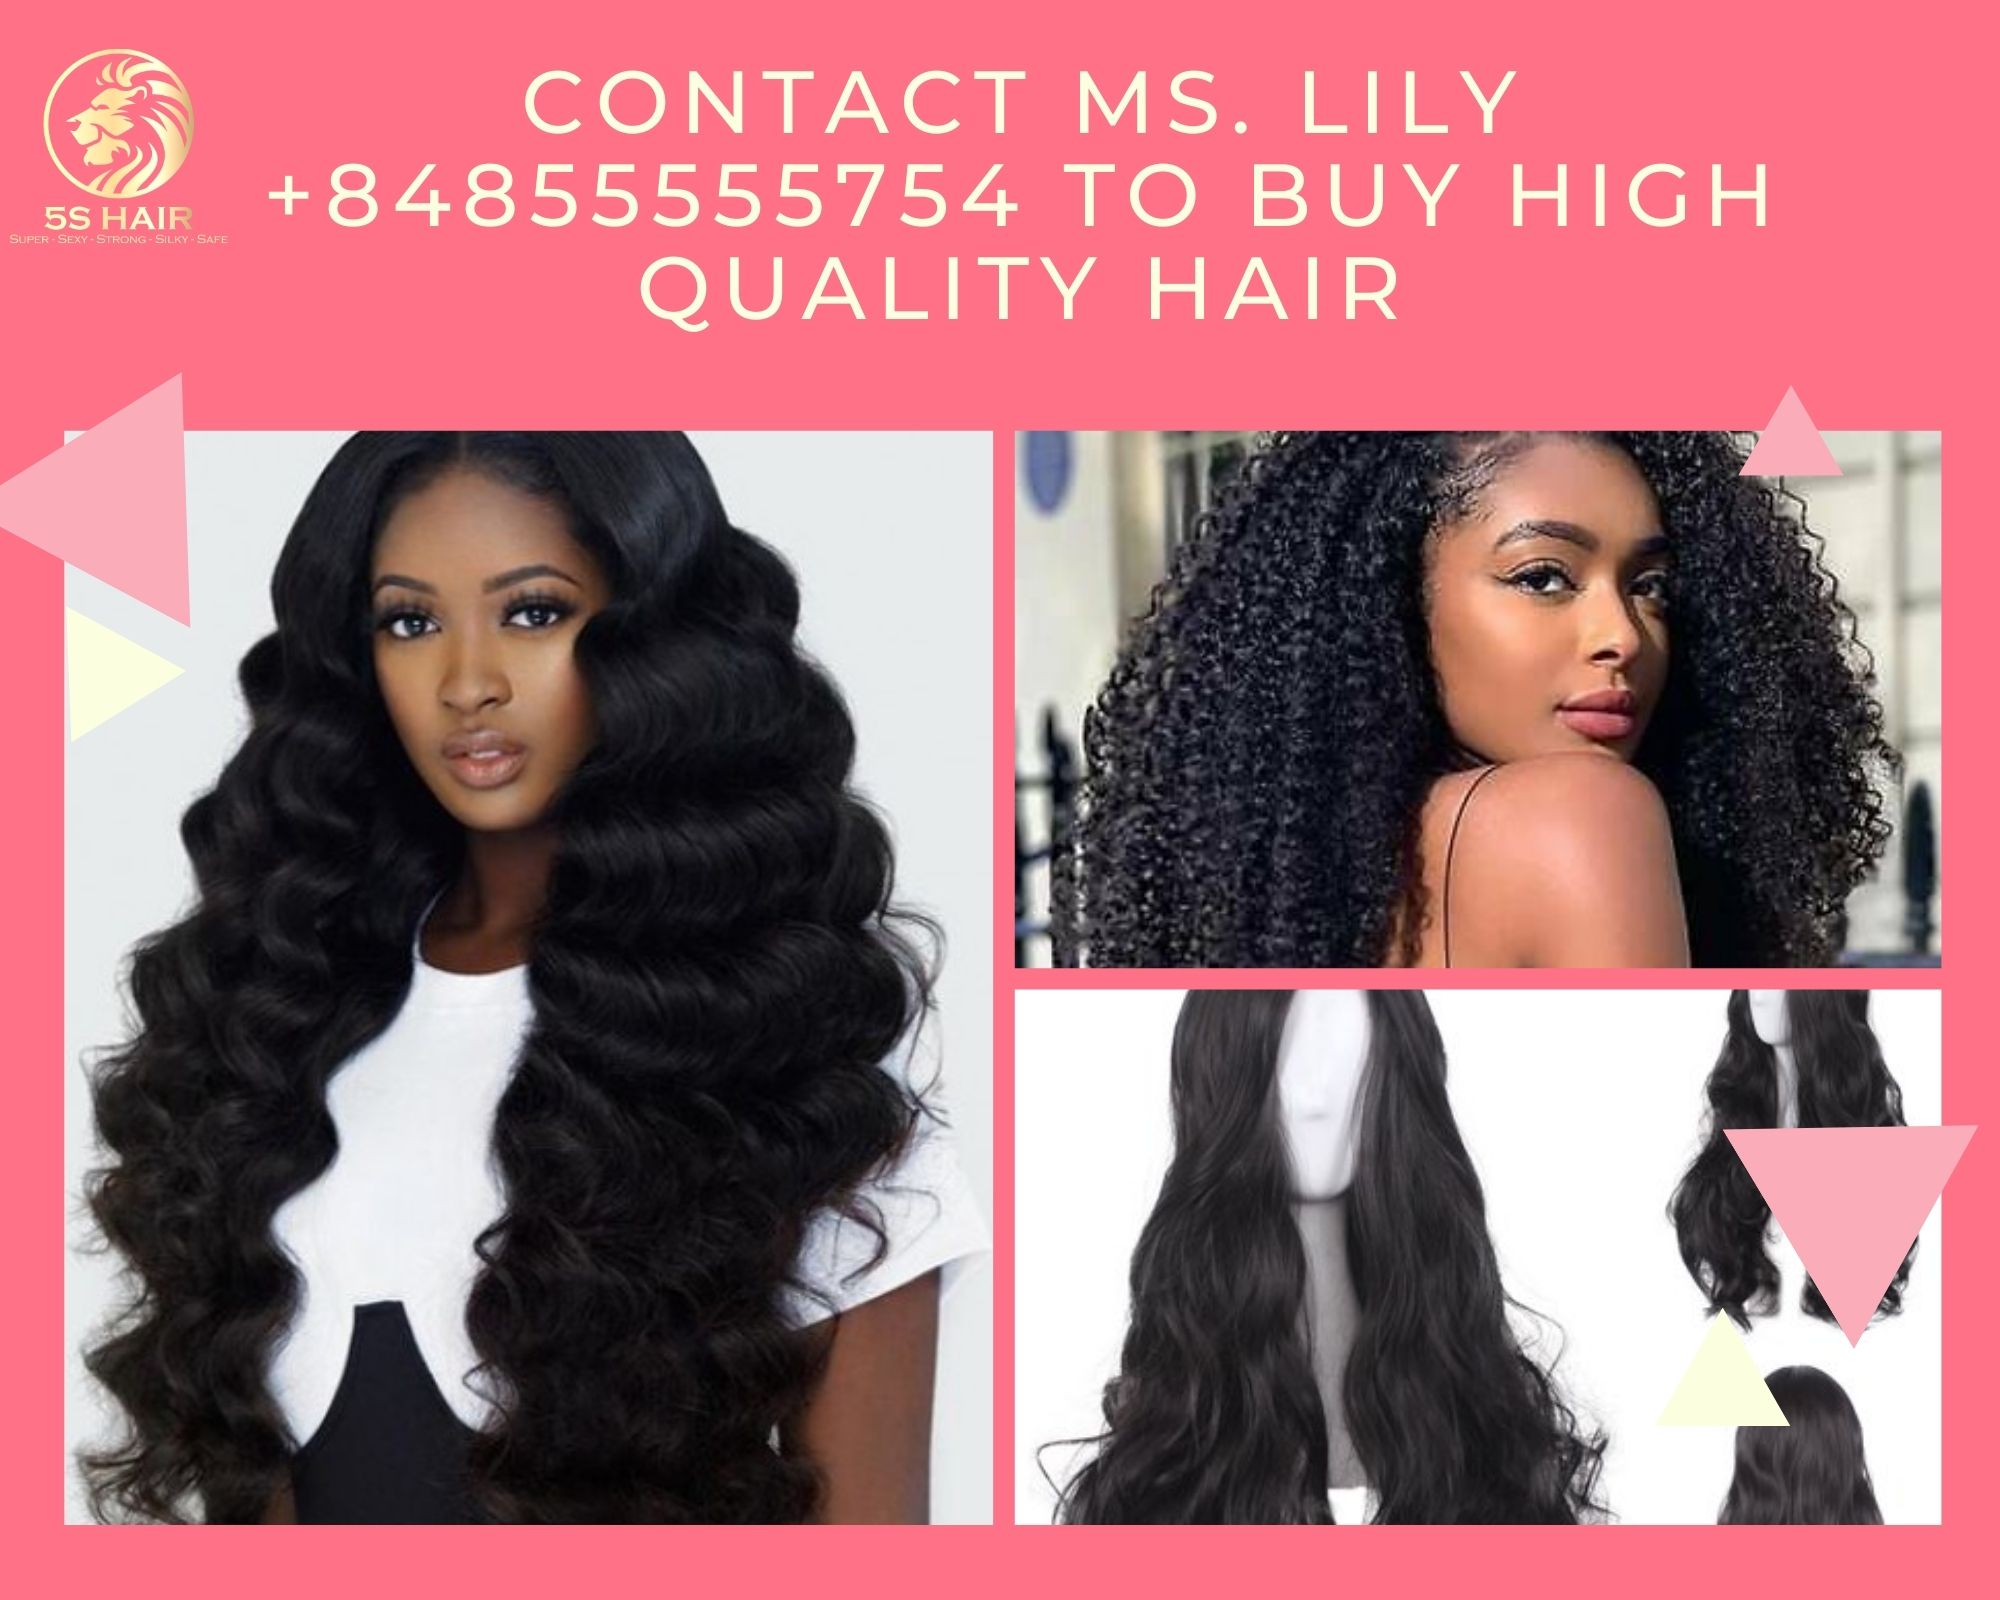 wholesale-hair-suppliers-in-south-africa-the-potential-to-cross-the-border20